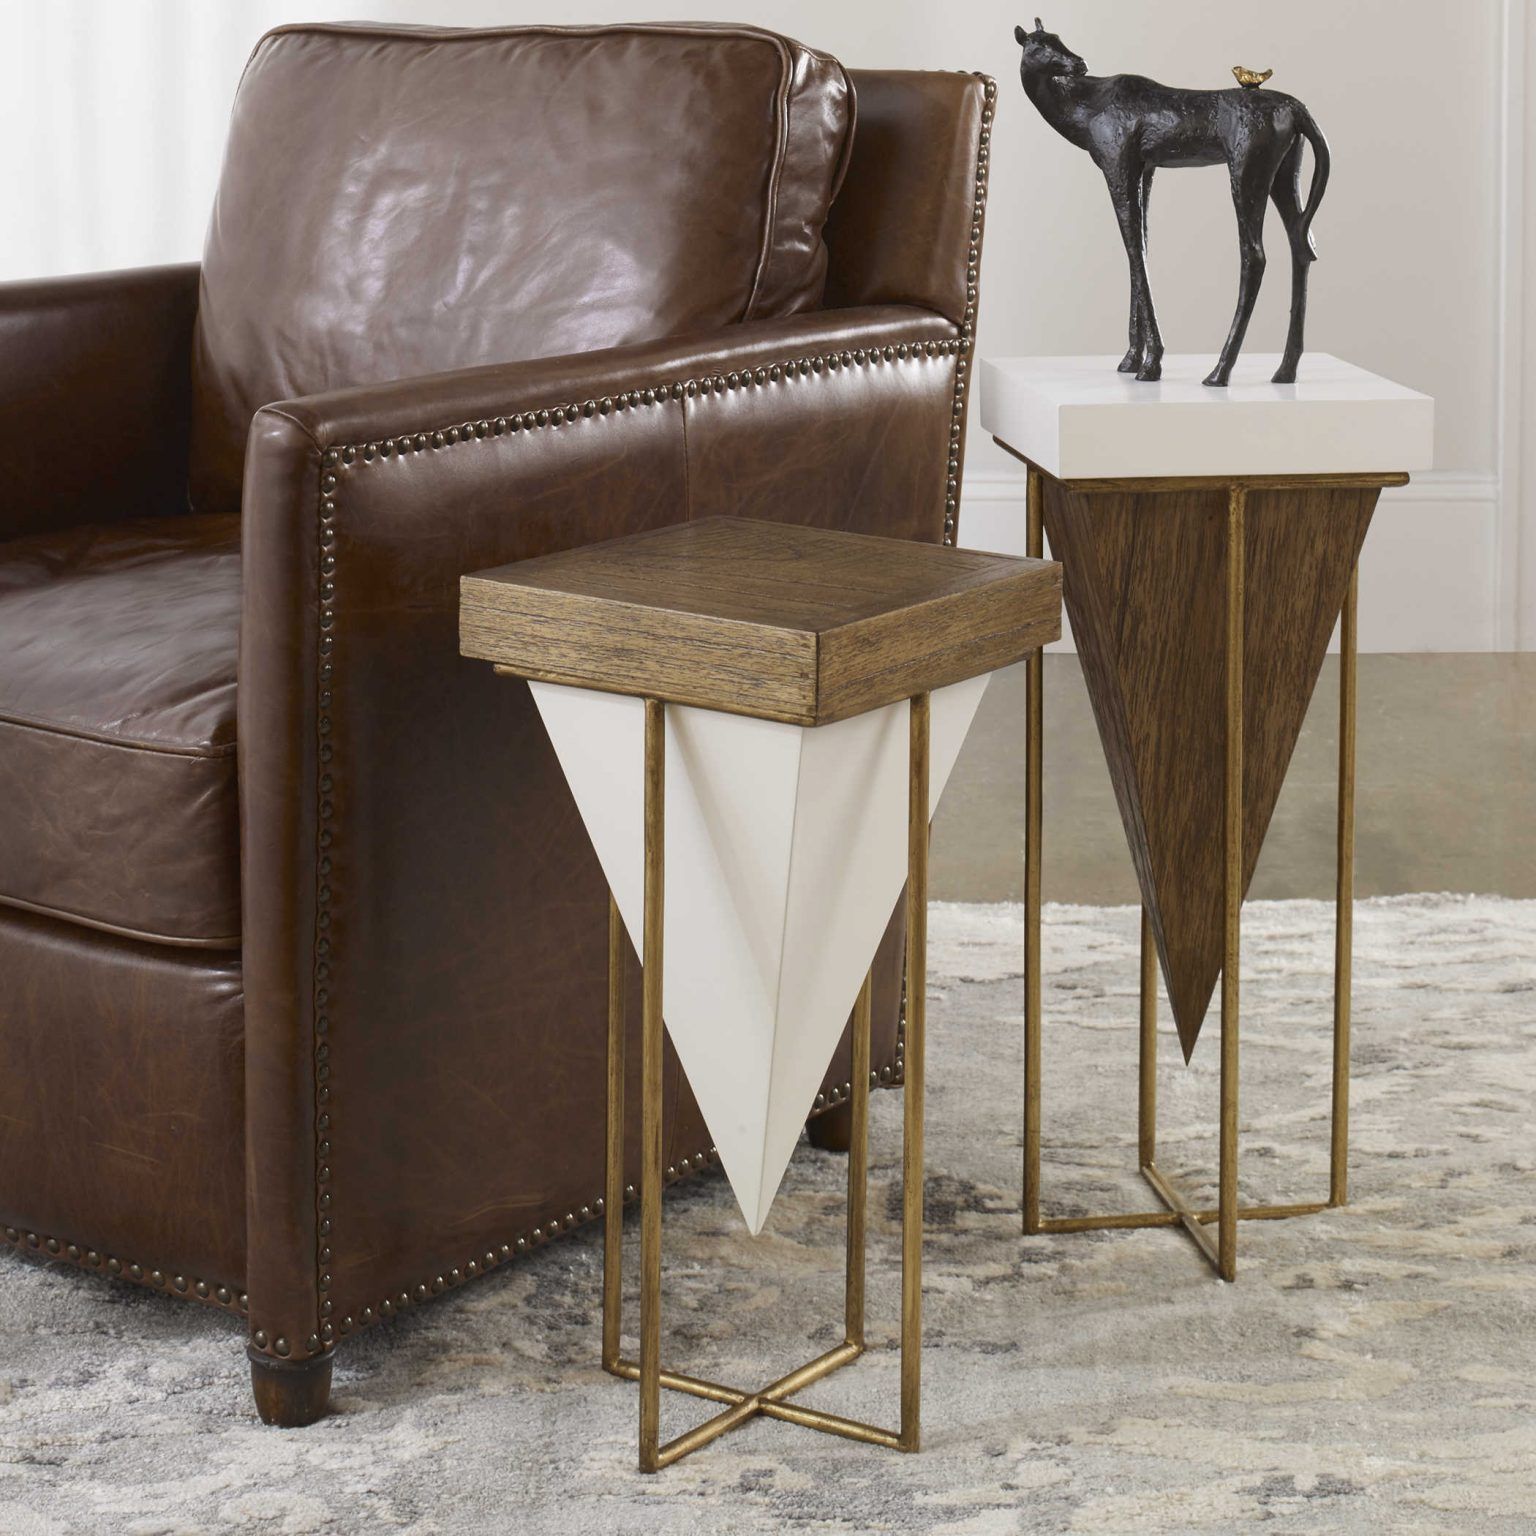 Accent tables featuring geometric shapes and mixed wood give a modern-retro feel to your decor